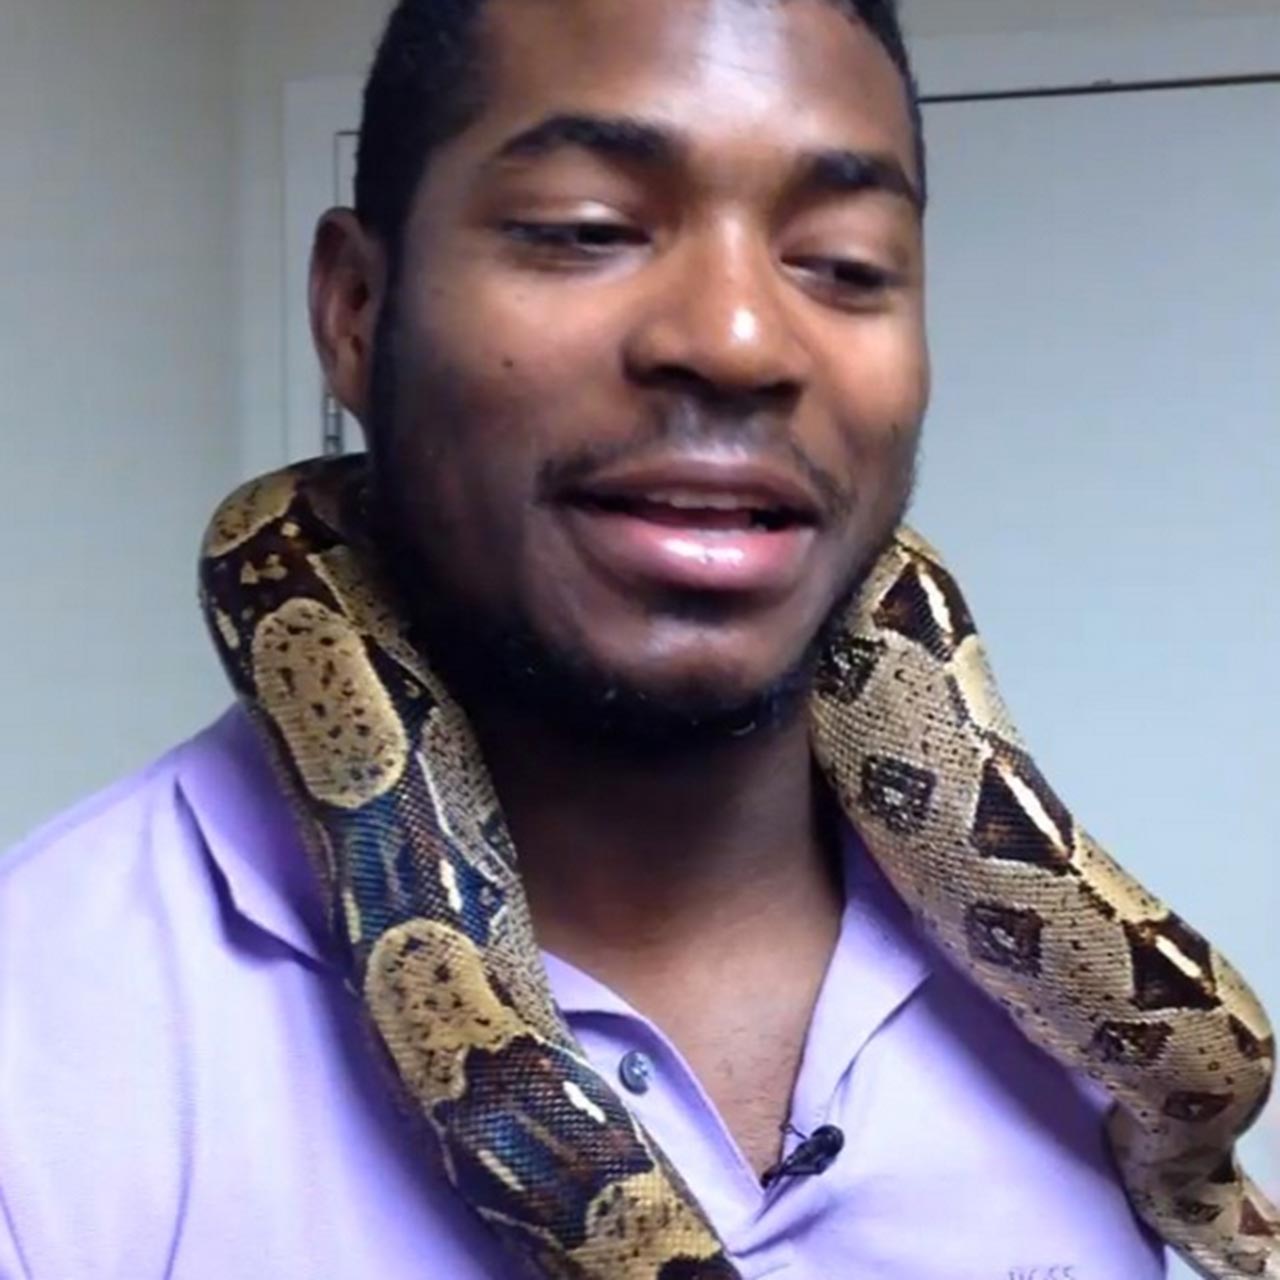 Yasiel Puig with a snake around his neck while visiting the Cincinnati Zoo.